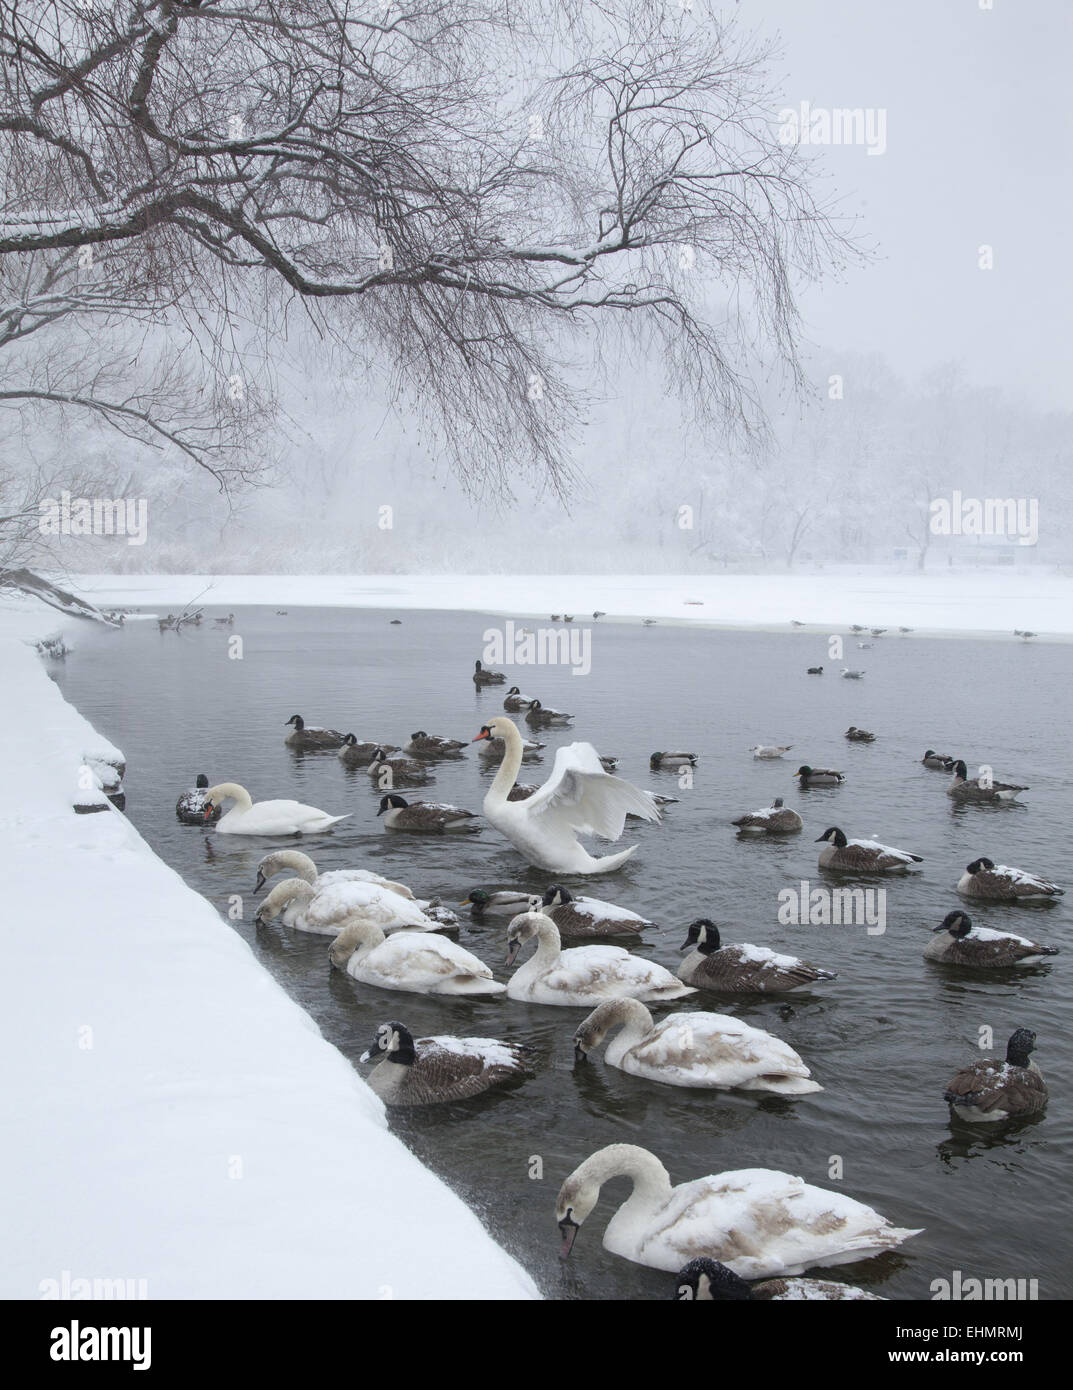 Water birds gather along the edge of the partially frozen lake in Prospect Park, hoping to be fed by people. Brooklyn, NY. Stock Photo